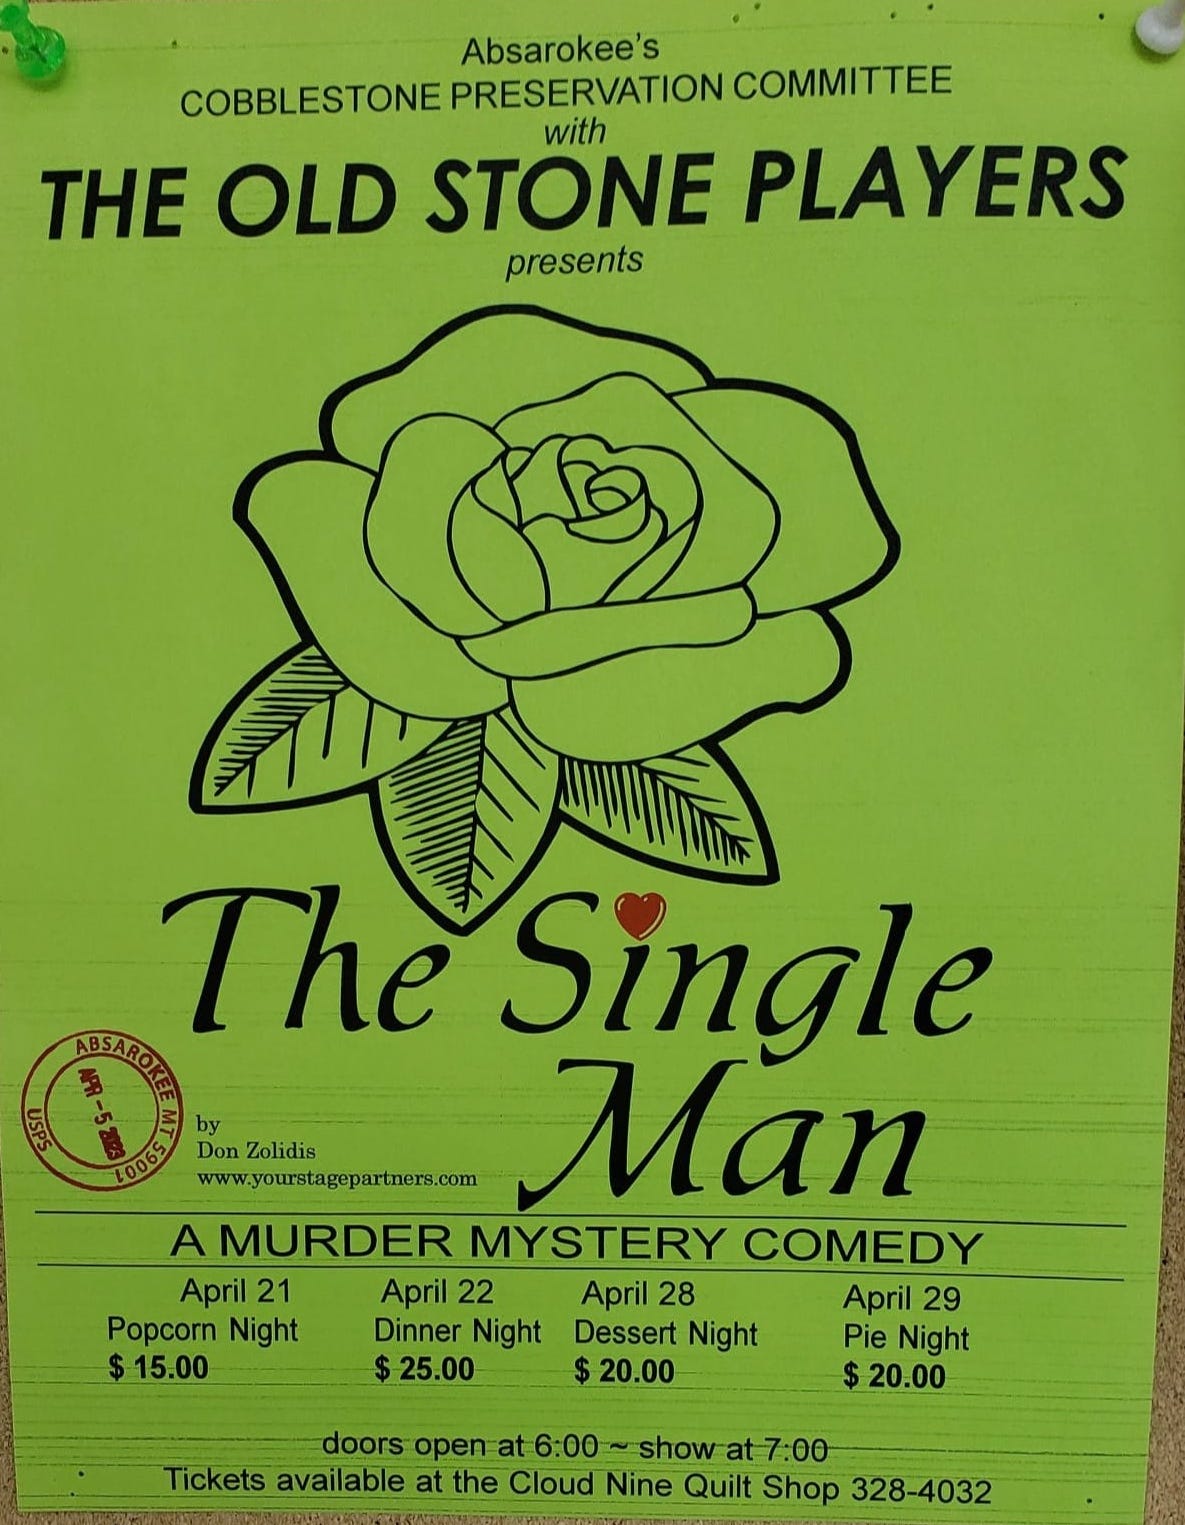 Old Stone Players present "The Single Man"